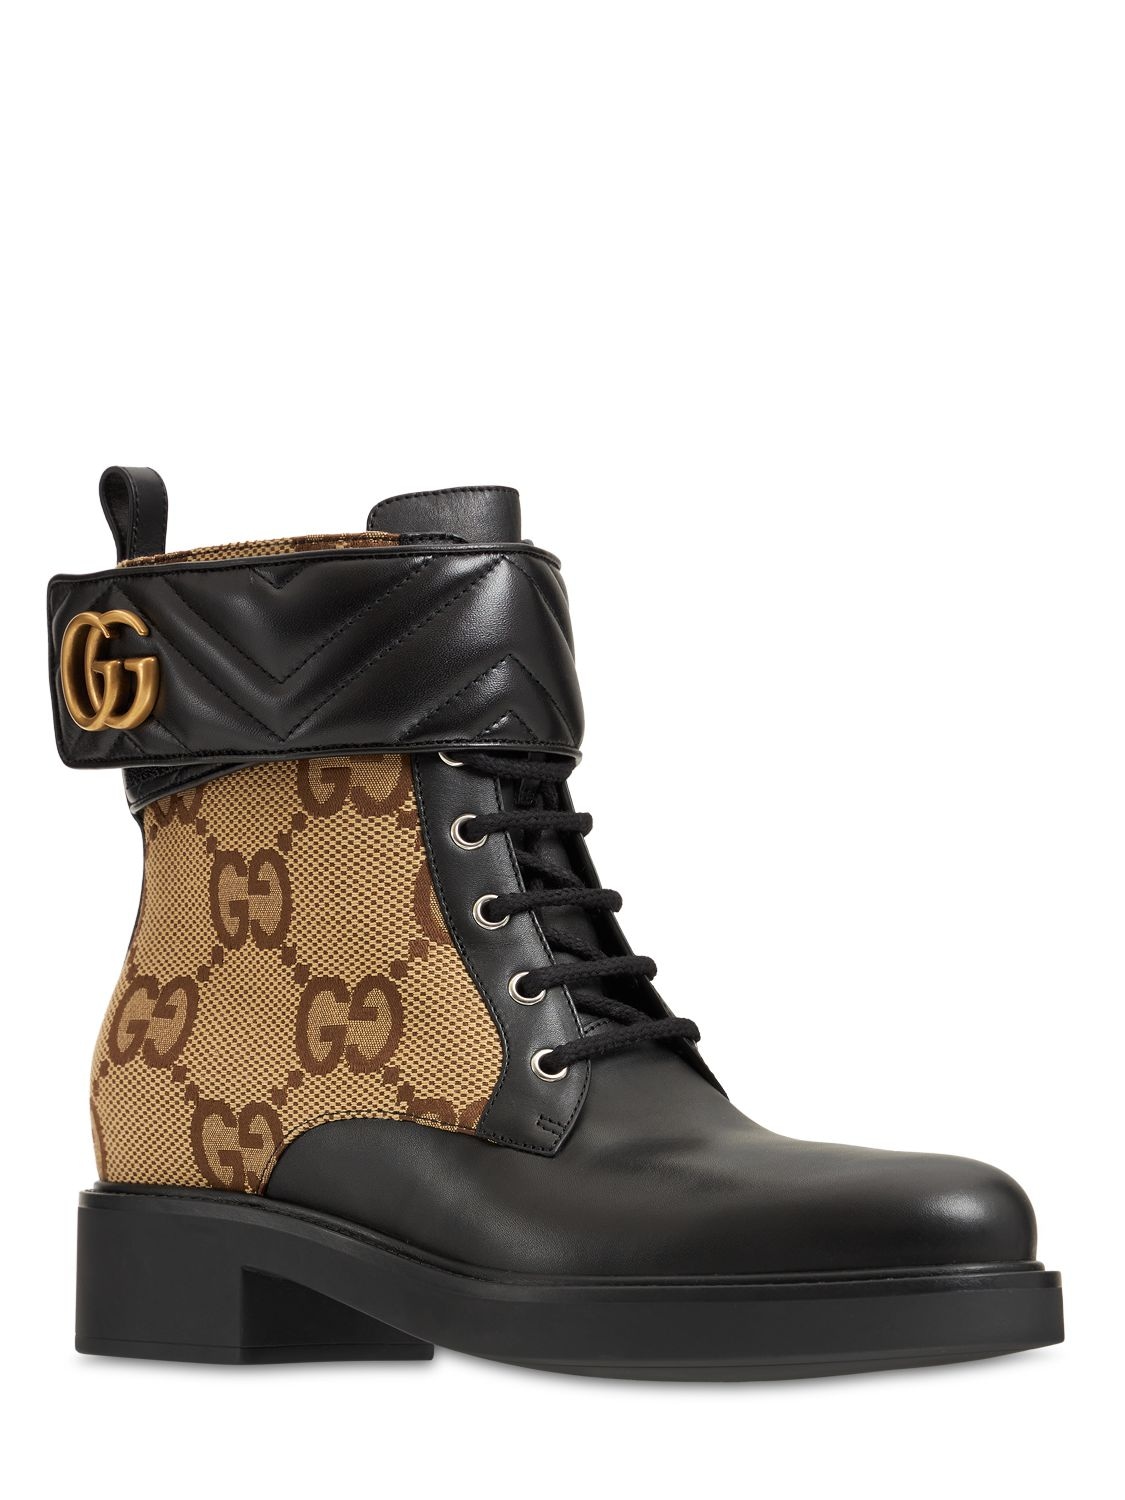 GUCCI 40MM MARMONT CANVAS & LEATHER ANKLE BOOT 75II9H084-MTI4NA2